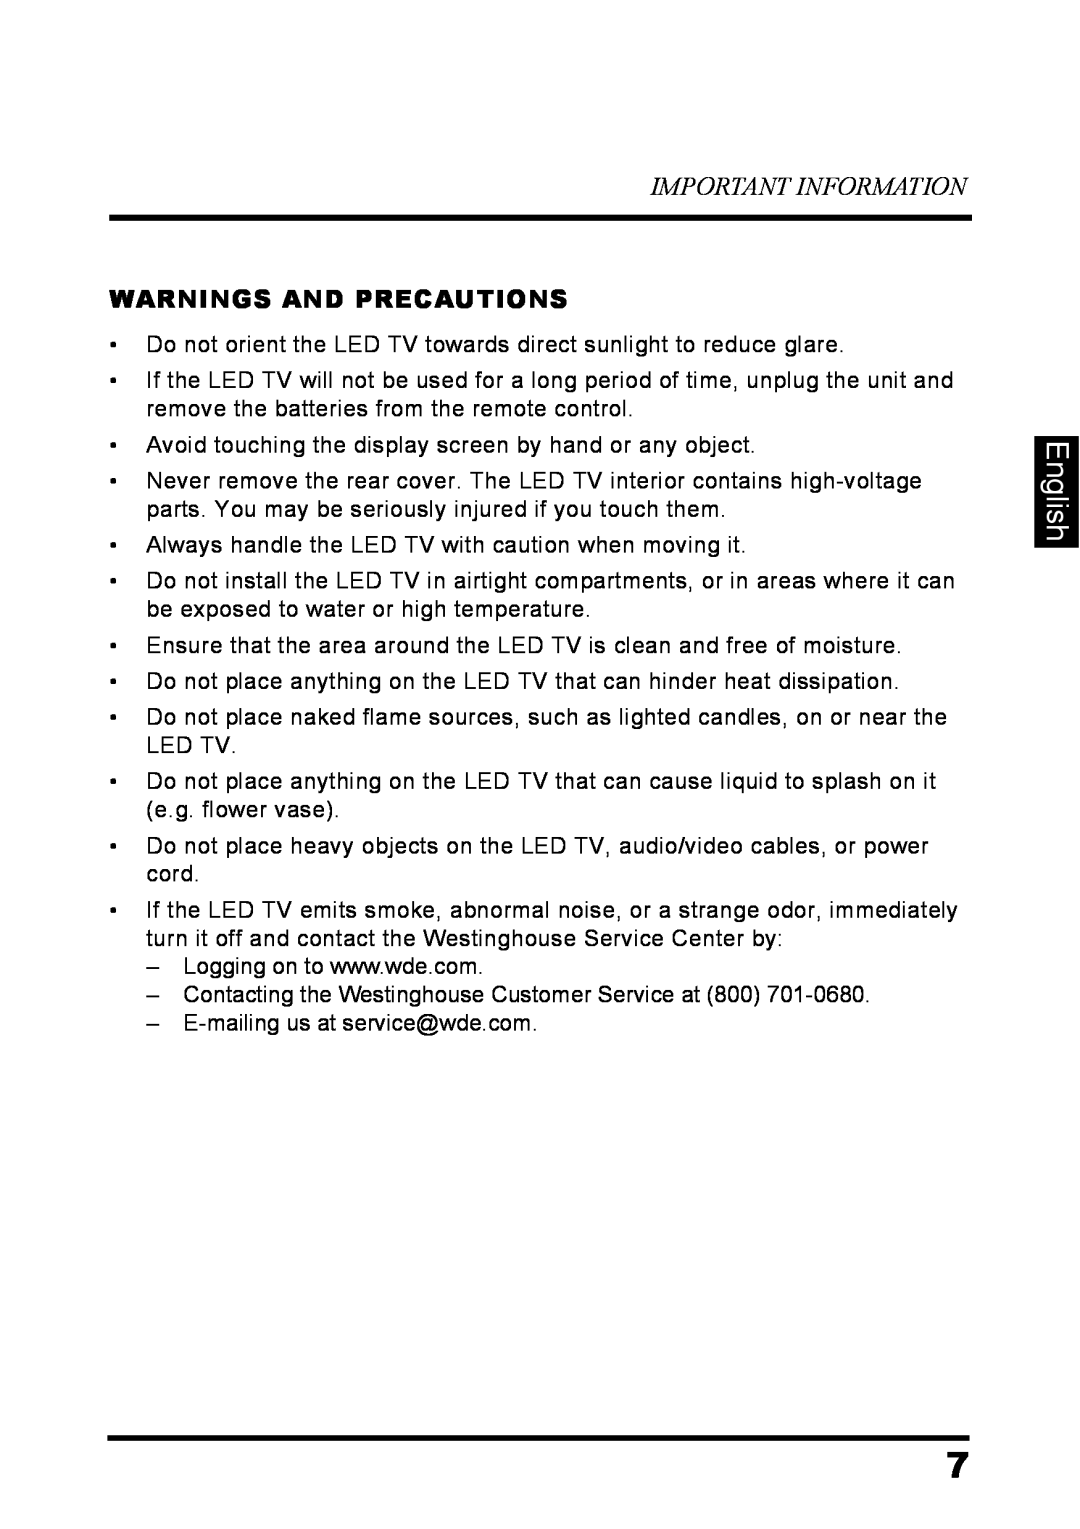 Westinghouse LD-3237 user manual English, Important Information, Warnings And Precautions 